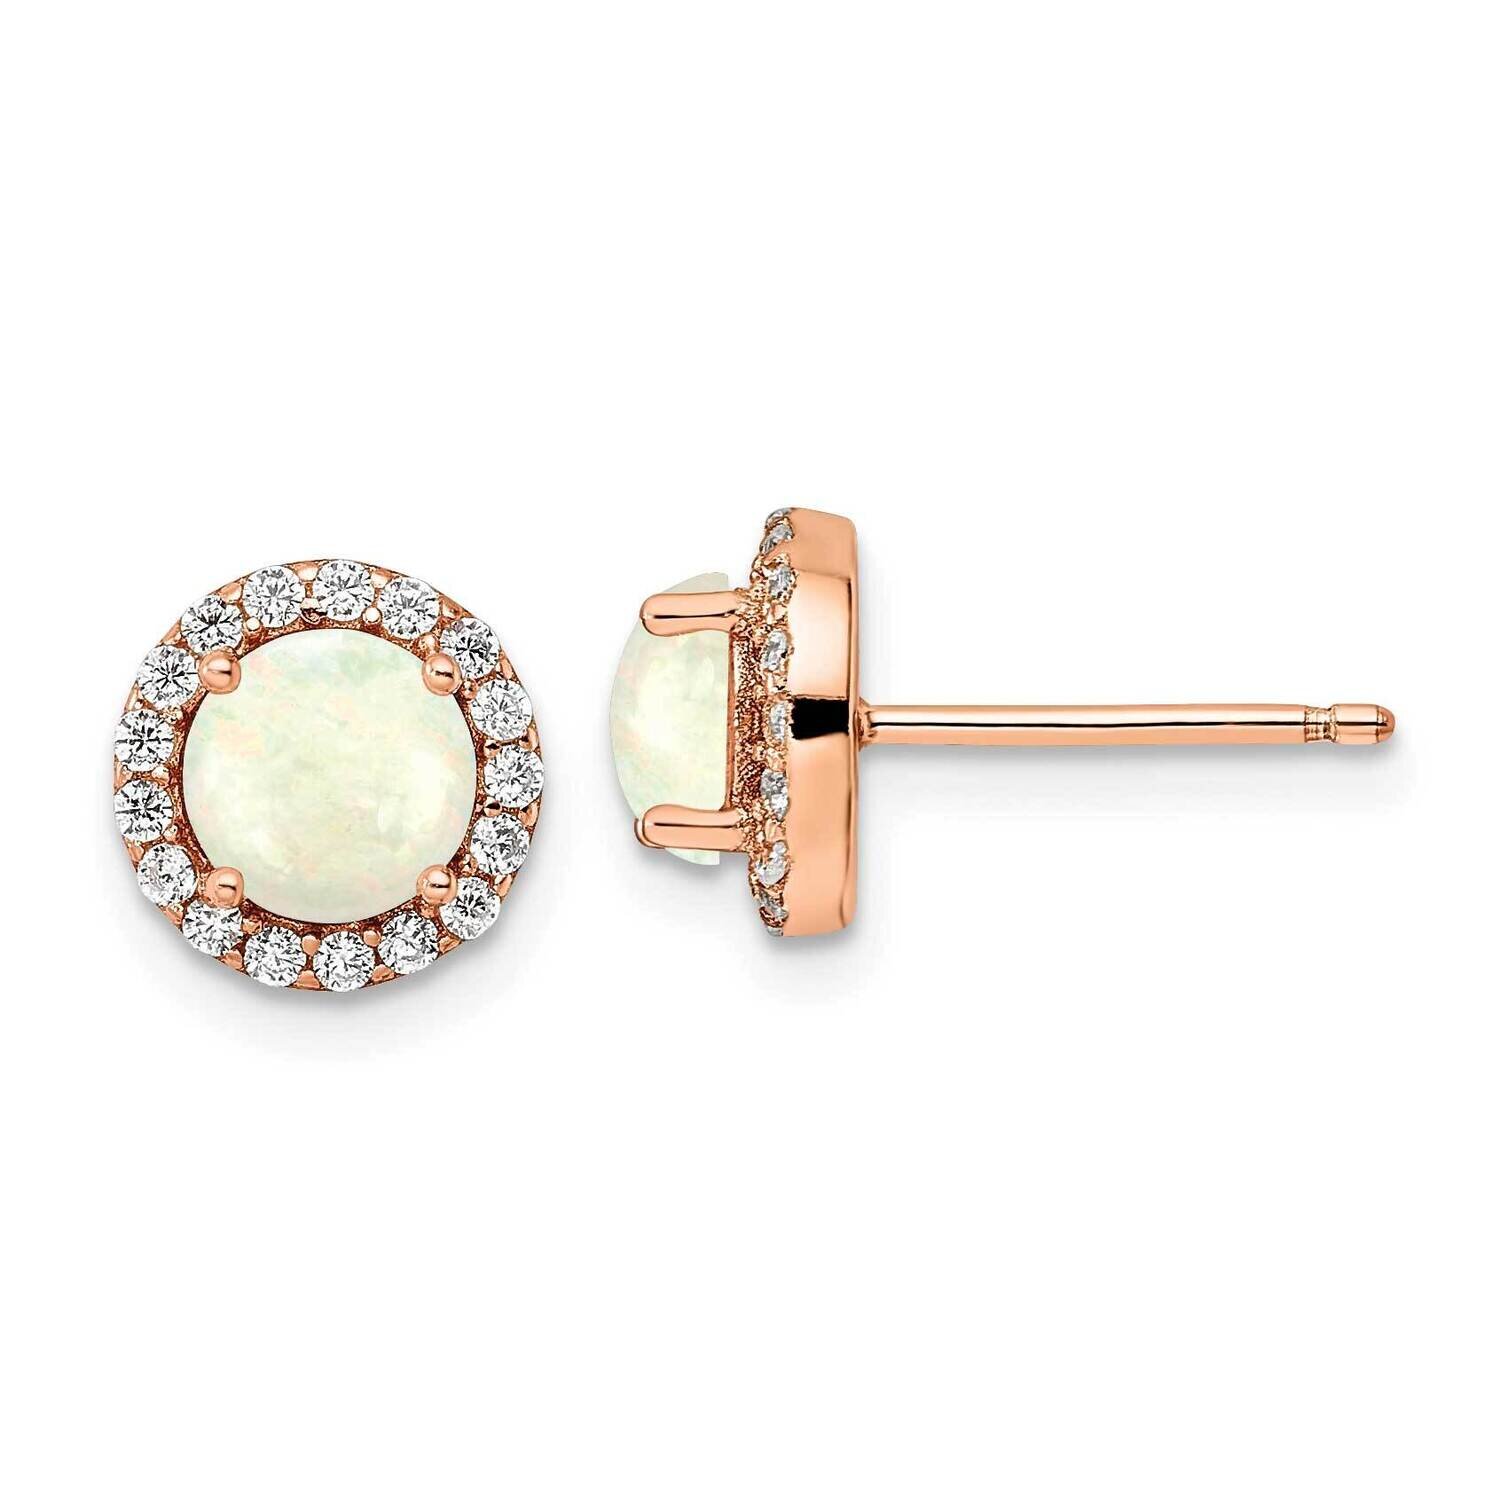 White Created Opal & CZ Diamond Halo Post Earrings Sterling Silver Rose-Tone QE16407